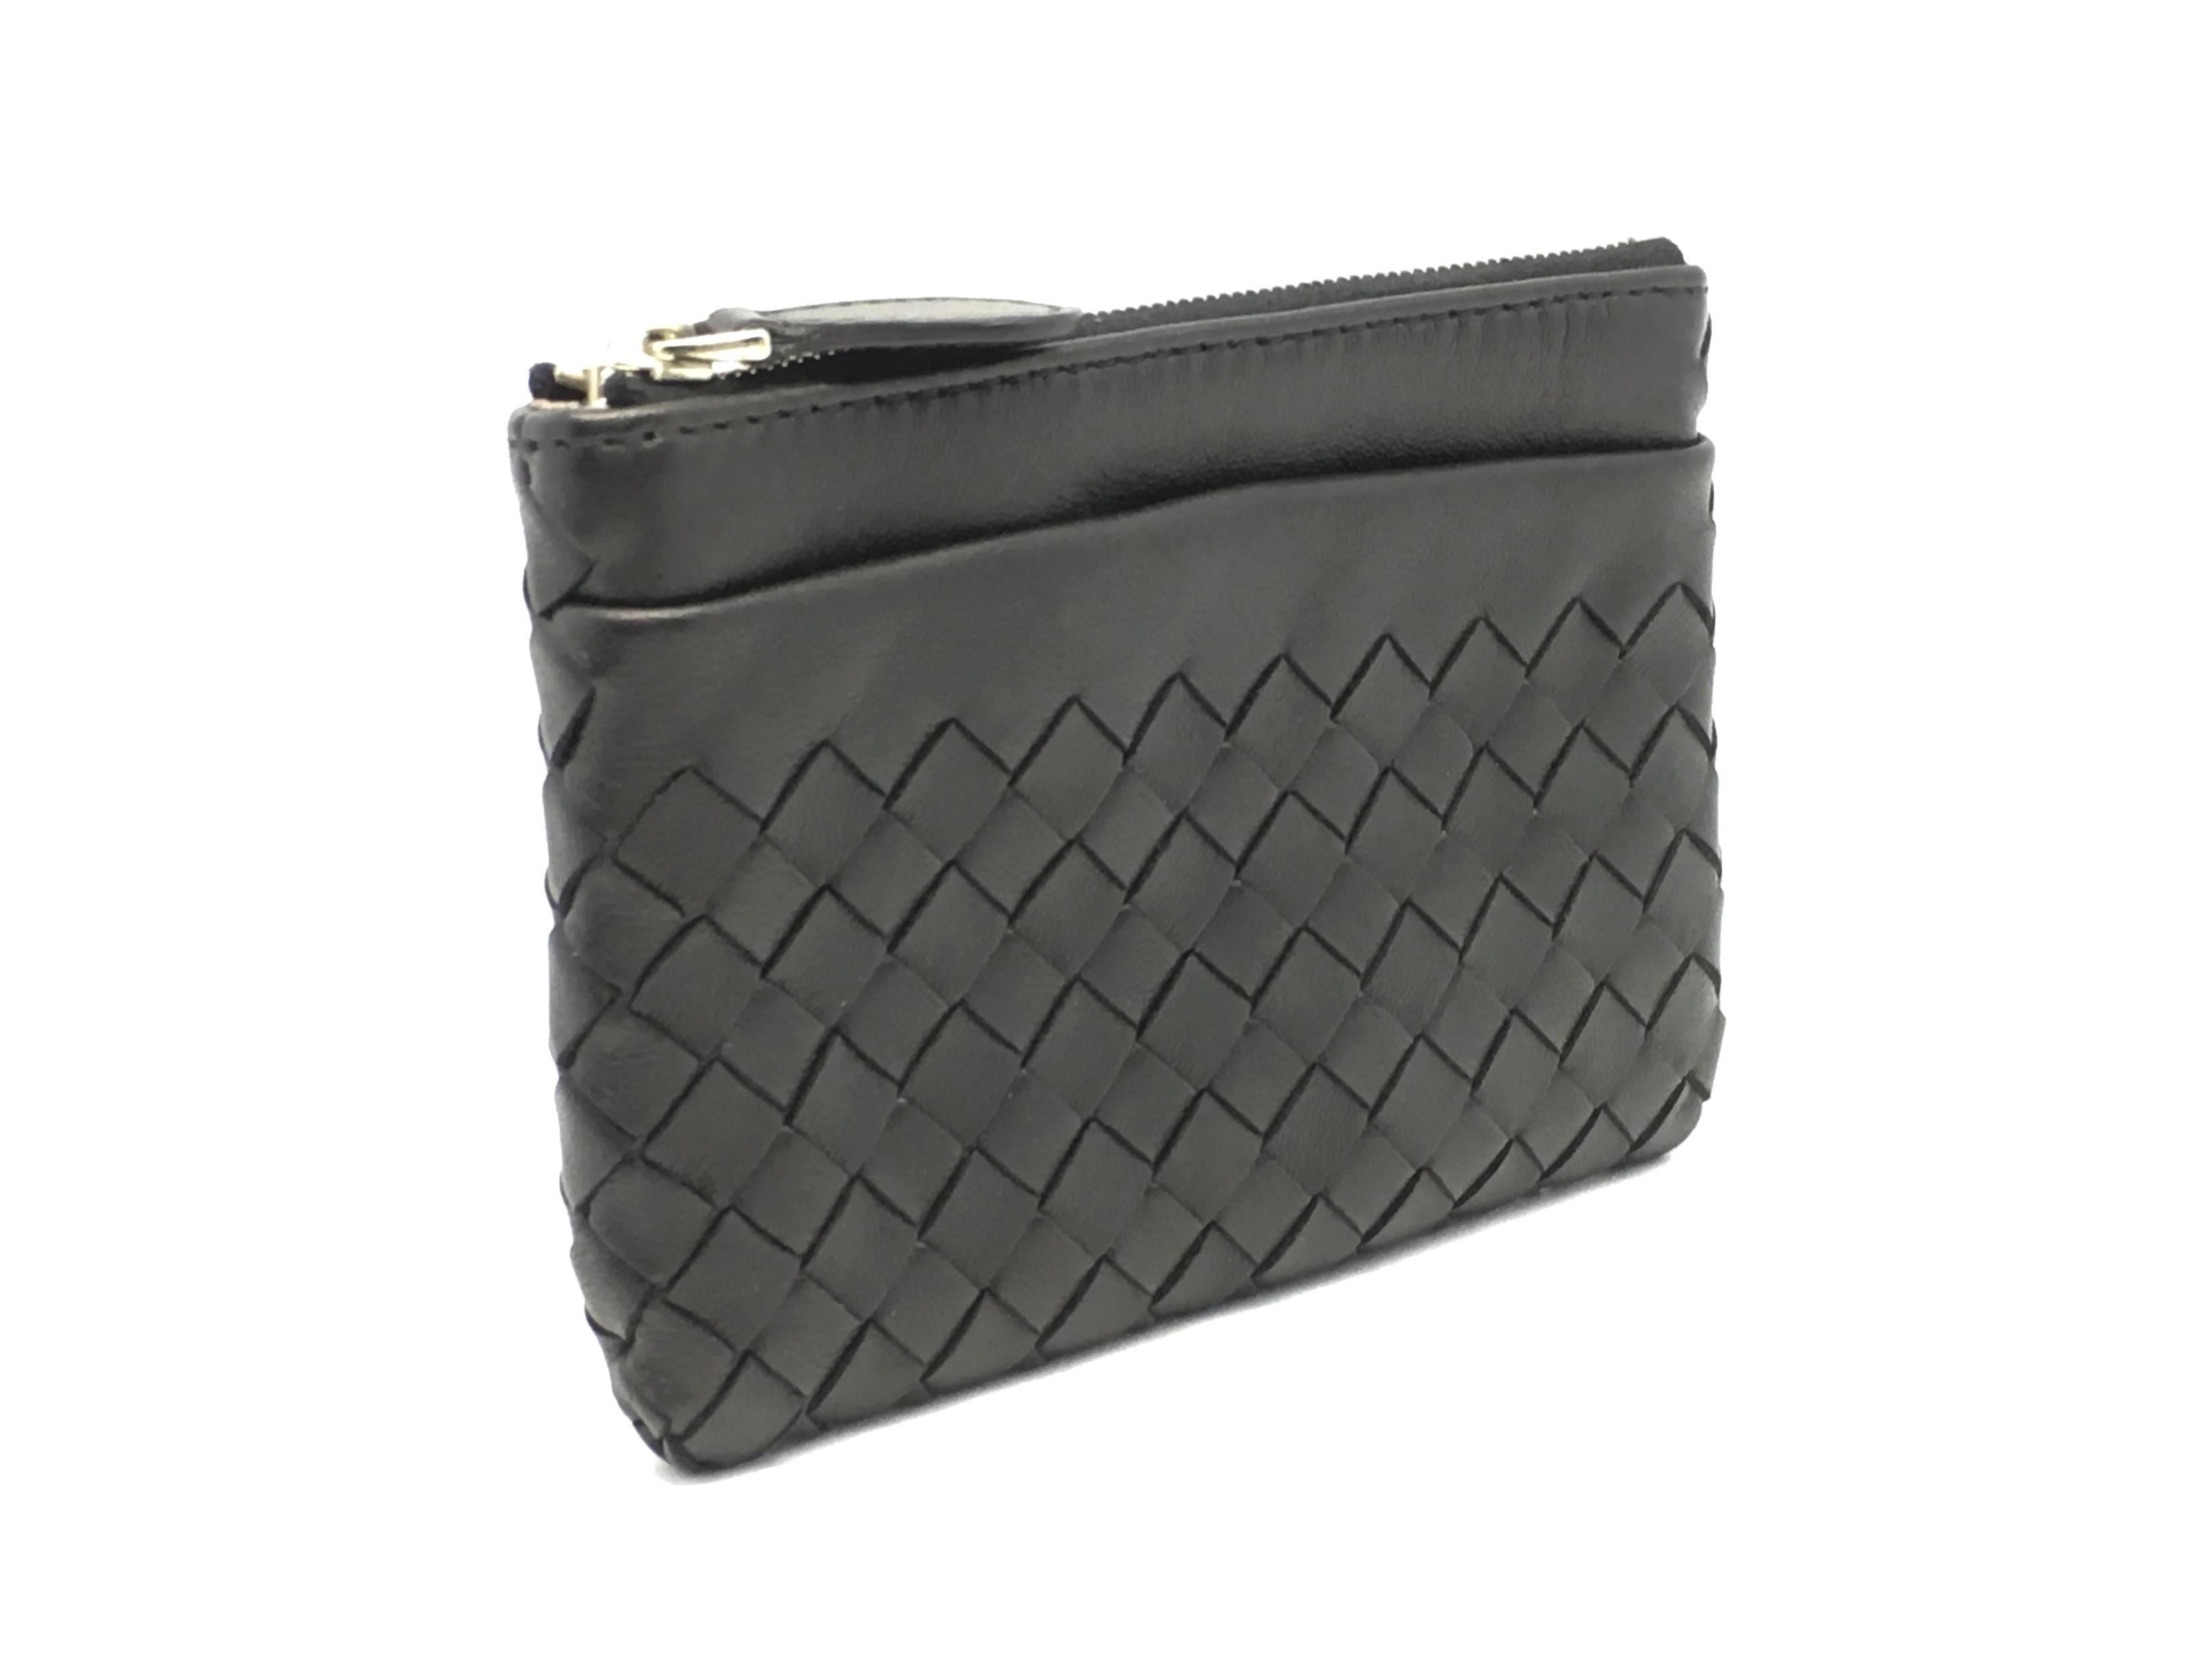 Color: Black

Material: Intrecciato Leather

Condition: Rank A
Overall: Good, few minor defects
Surface: Good
Corners: Minor Scratches 
Edges: Good
Hardware: Minor Scratches

W13.5 × H9 × D1.5cm（W5.3" × H3.5" × D0.5"）

***This item